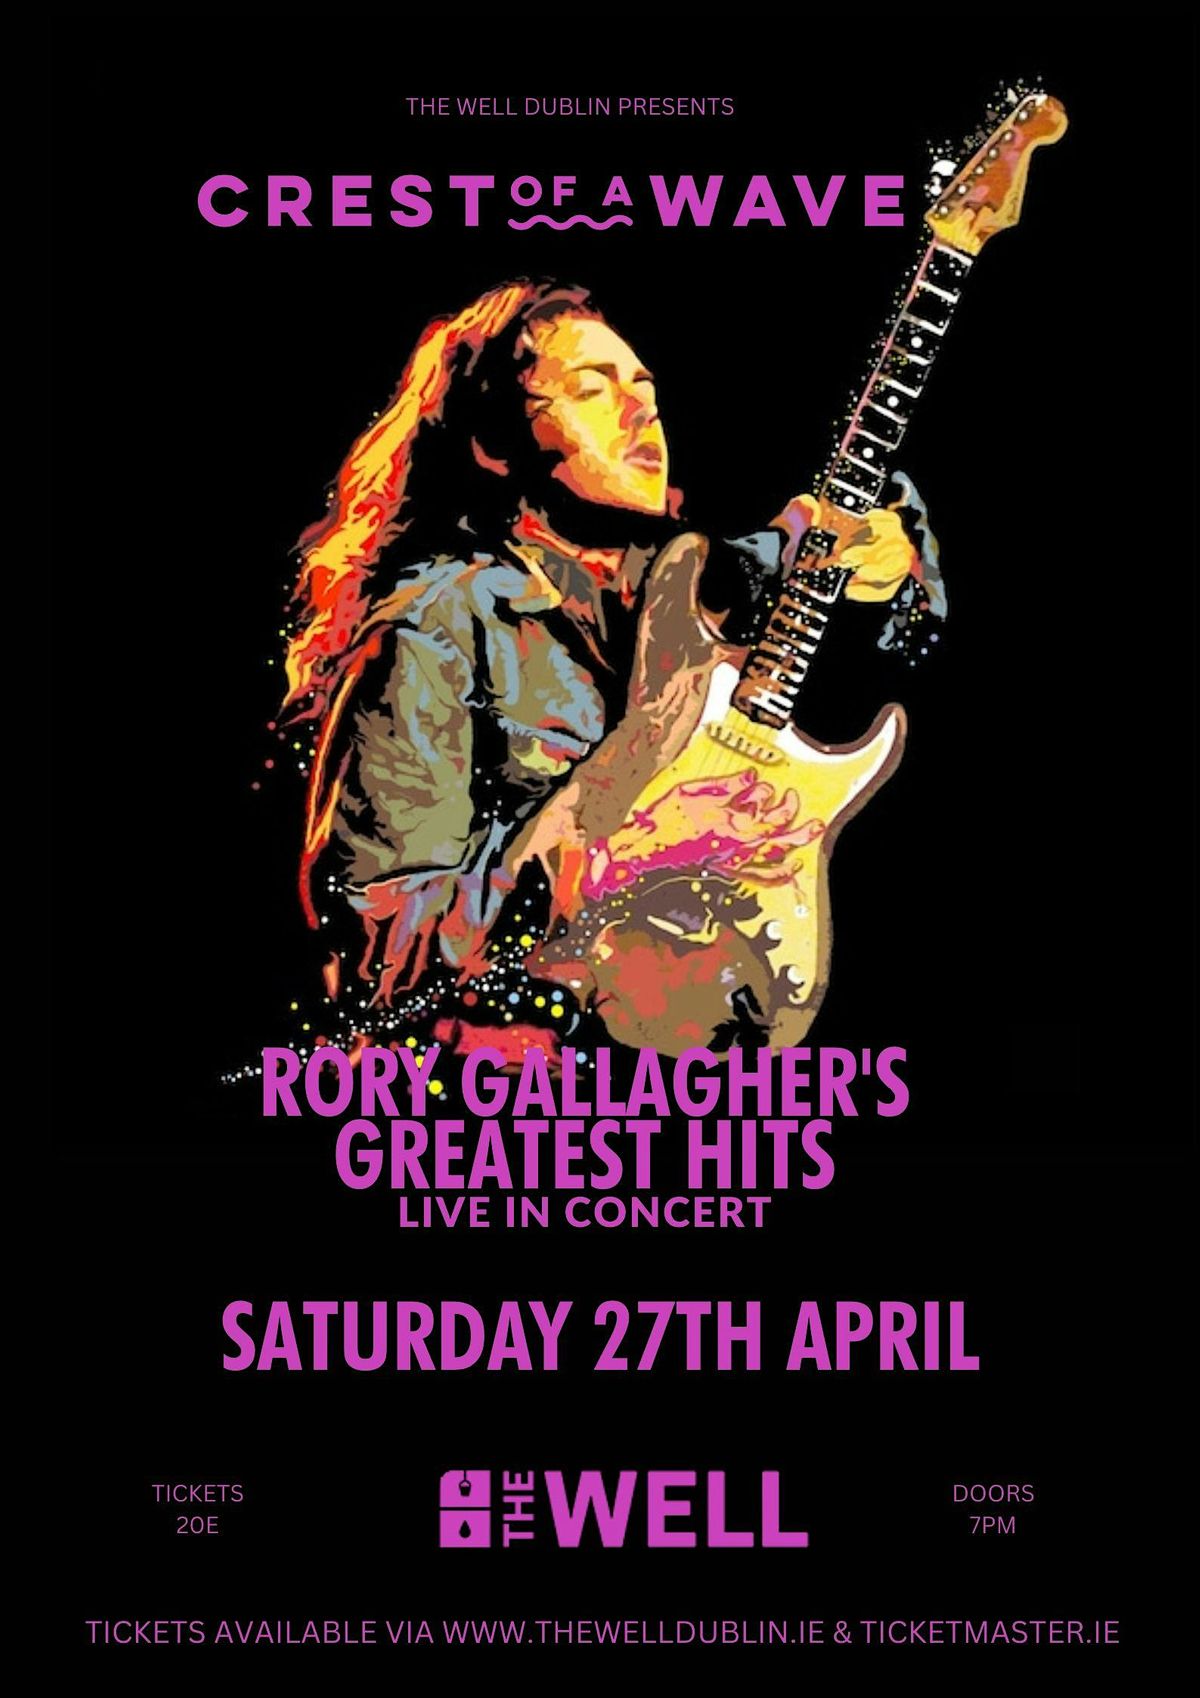 'Crest of a Wave' - Rory Gallagher Tribute show - Live in Concert